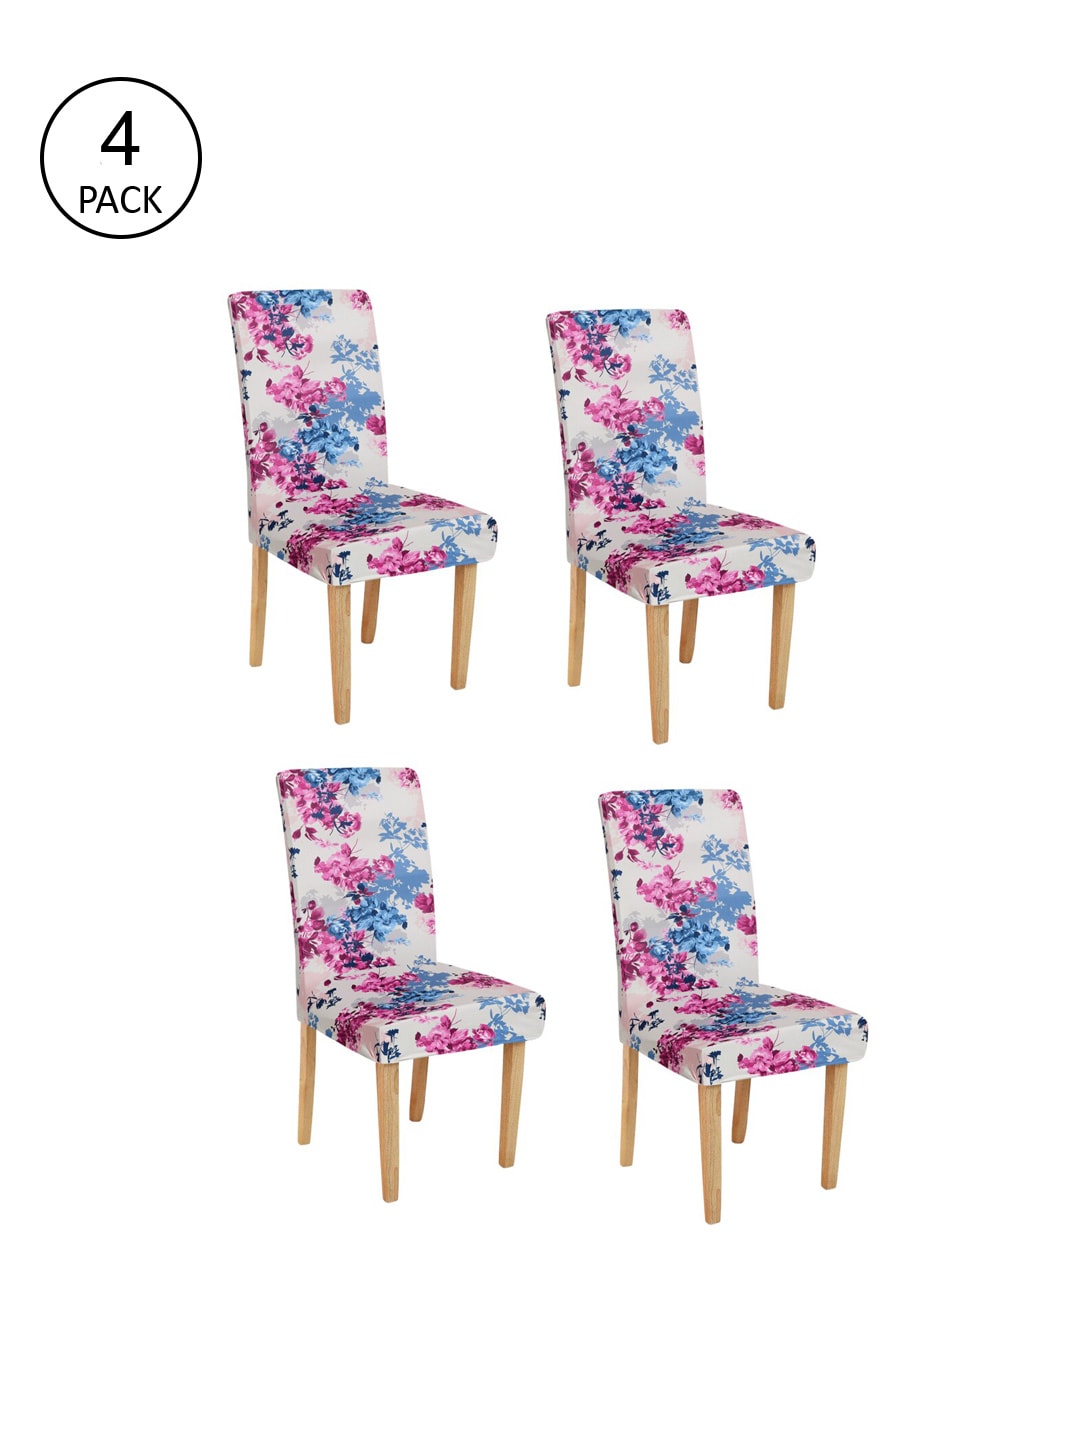 Rajasthan Decor Set Of 4 Beige & Pink Floral Printed Chair Covers Price in India